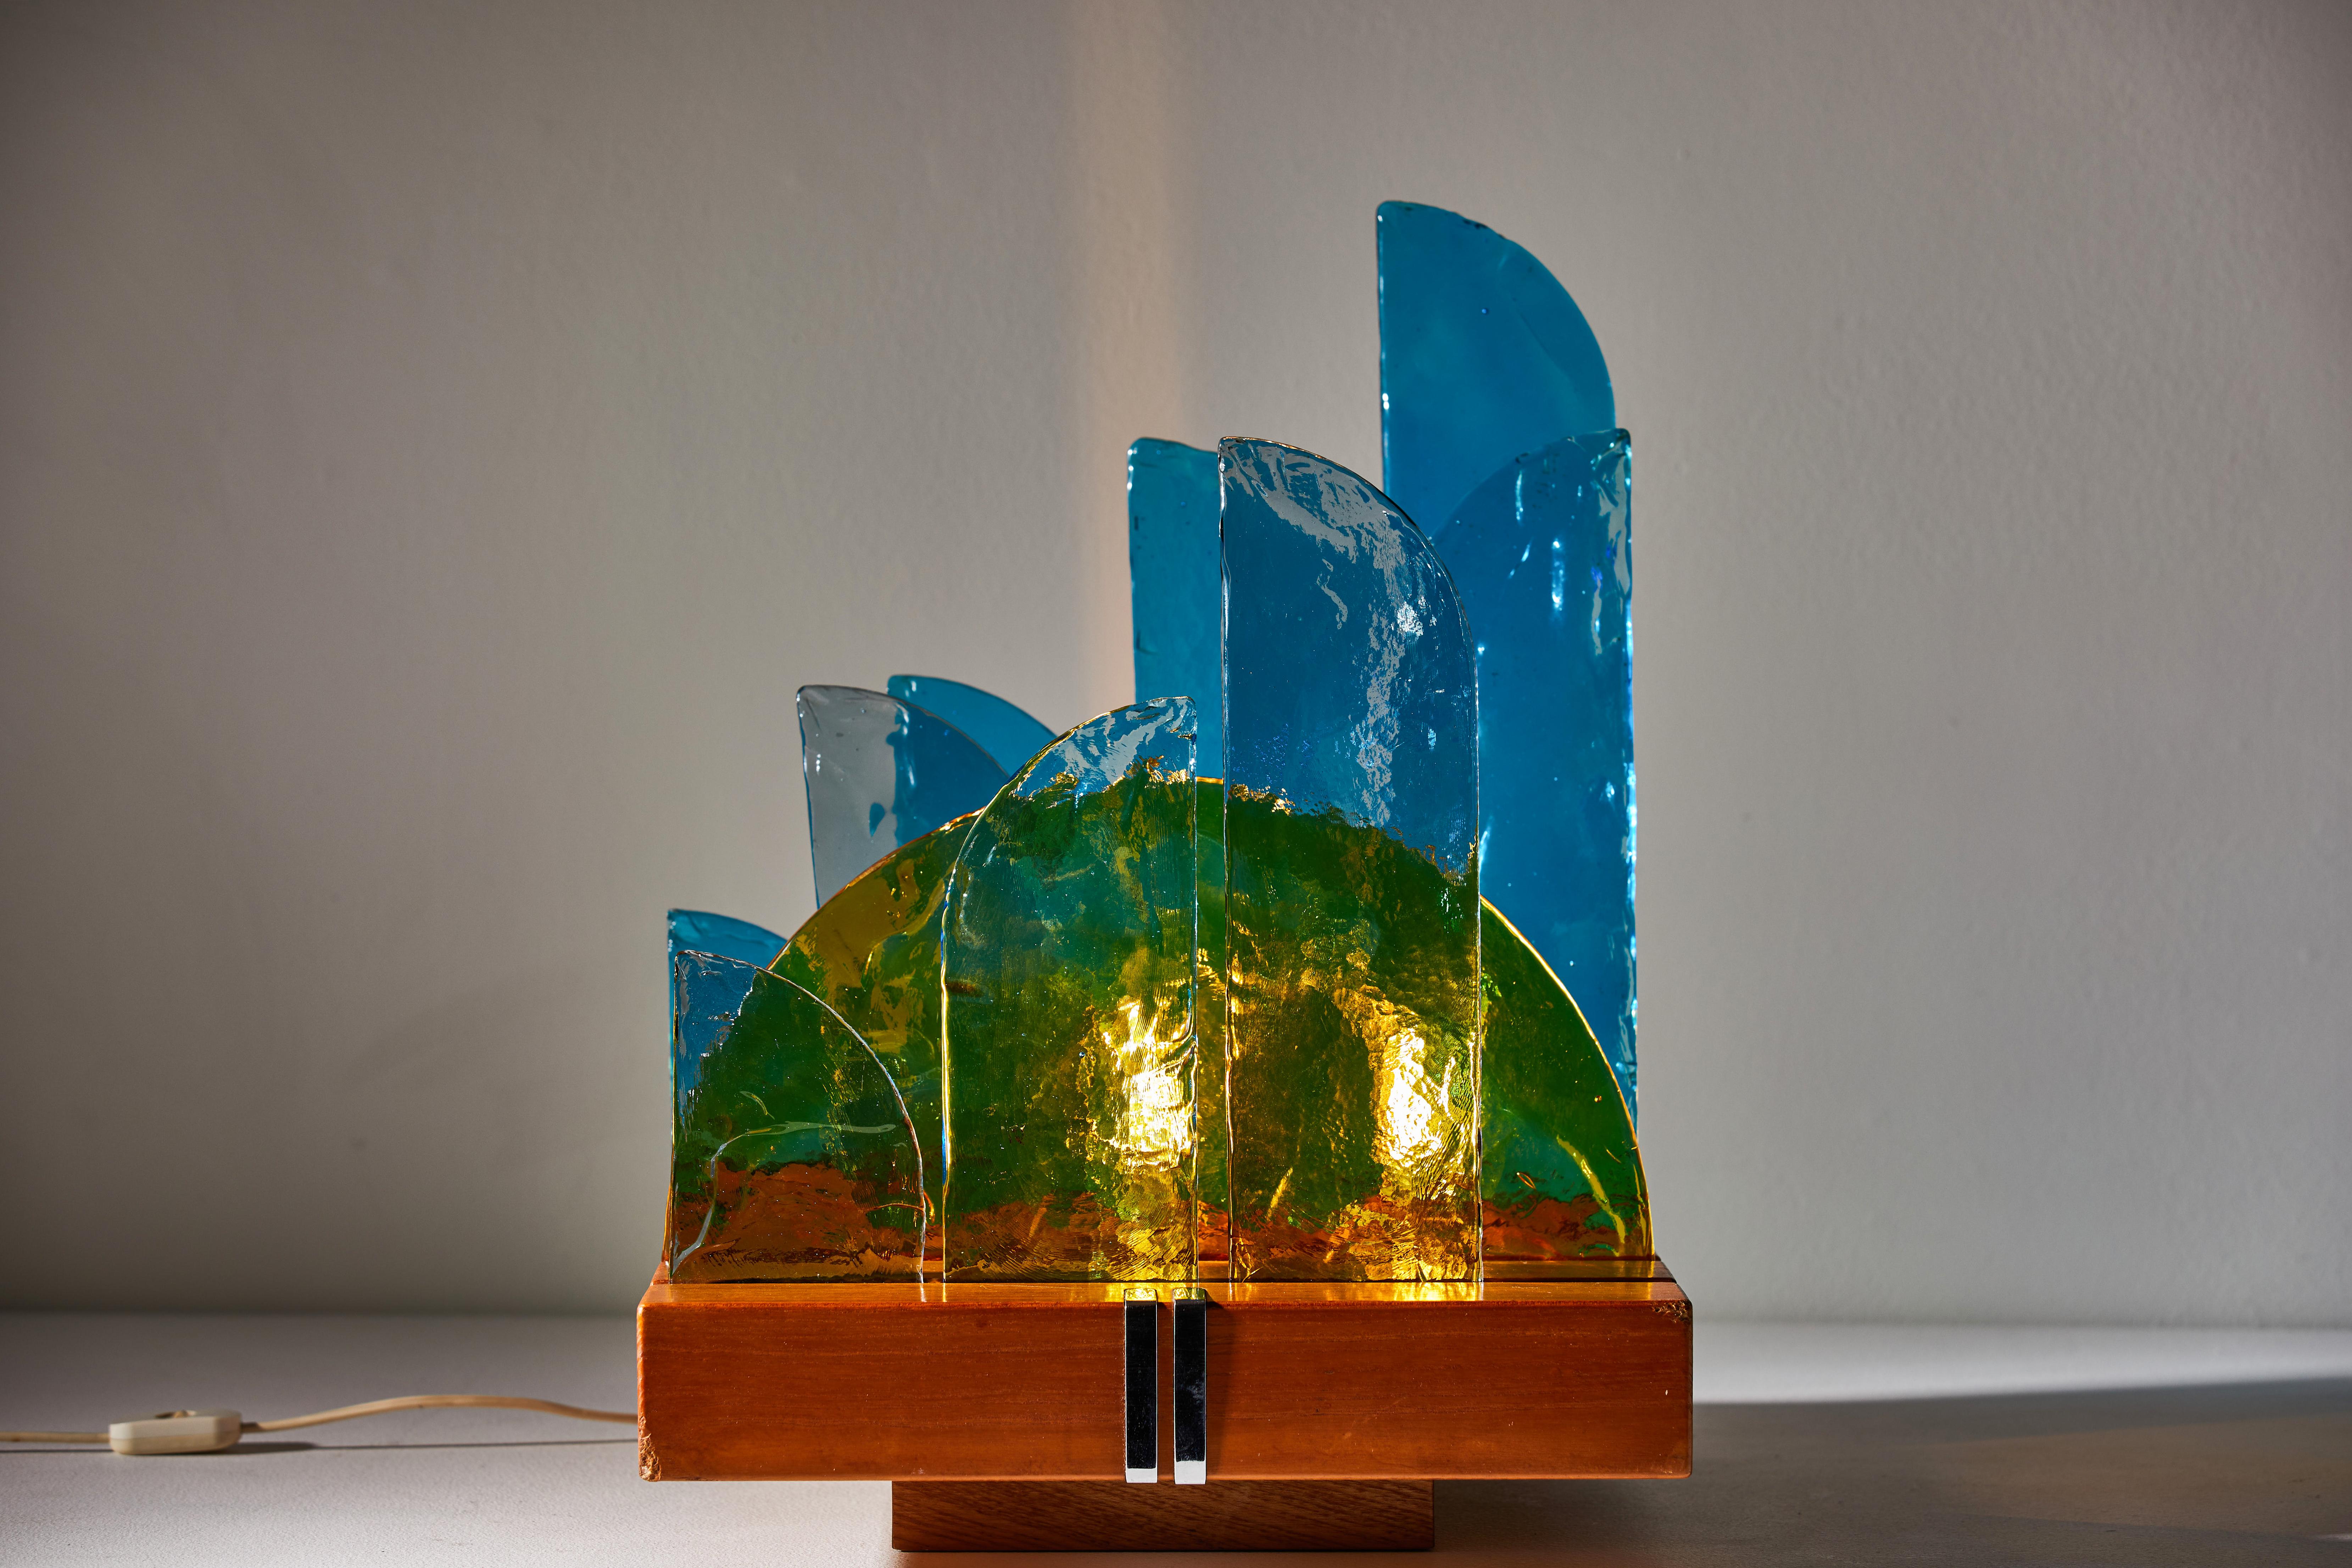 Rare and important Il Sole and la Fuvola which translates to Sun and the cloud table lamp by Luigi Massoni for Itter Elettronica. Designed and manufactured in Italy, 1970. Colored glass, wood, chromed metal inlay. Original cord. Takes two E14